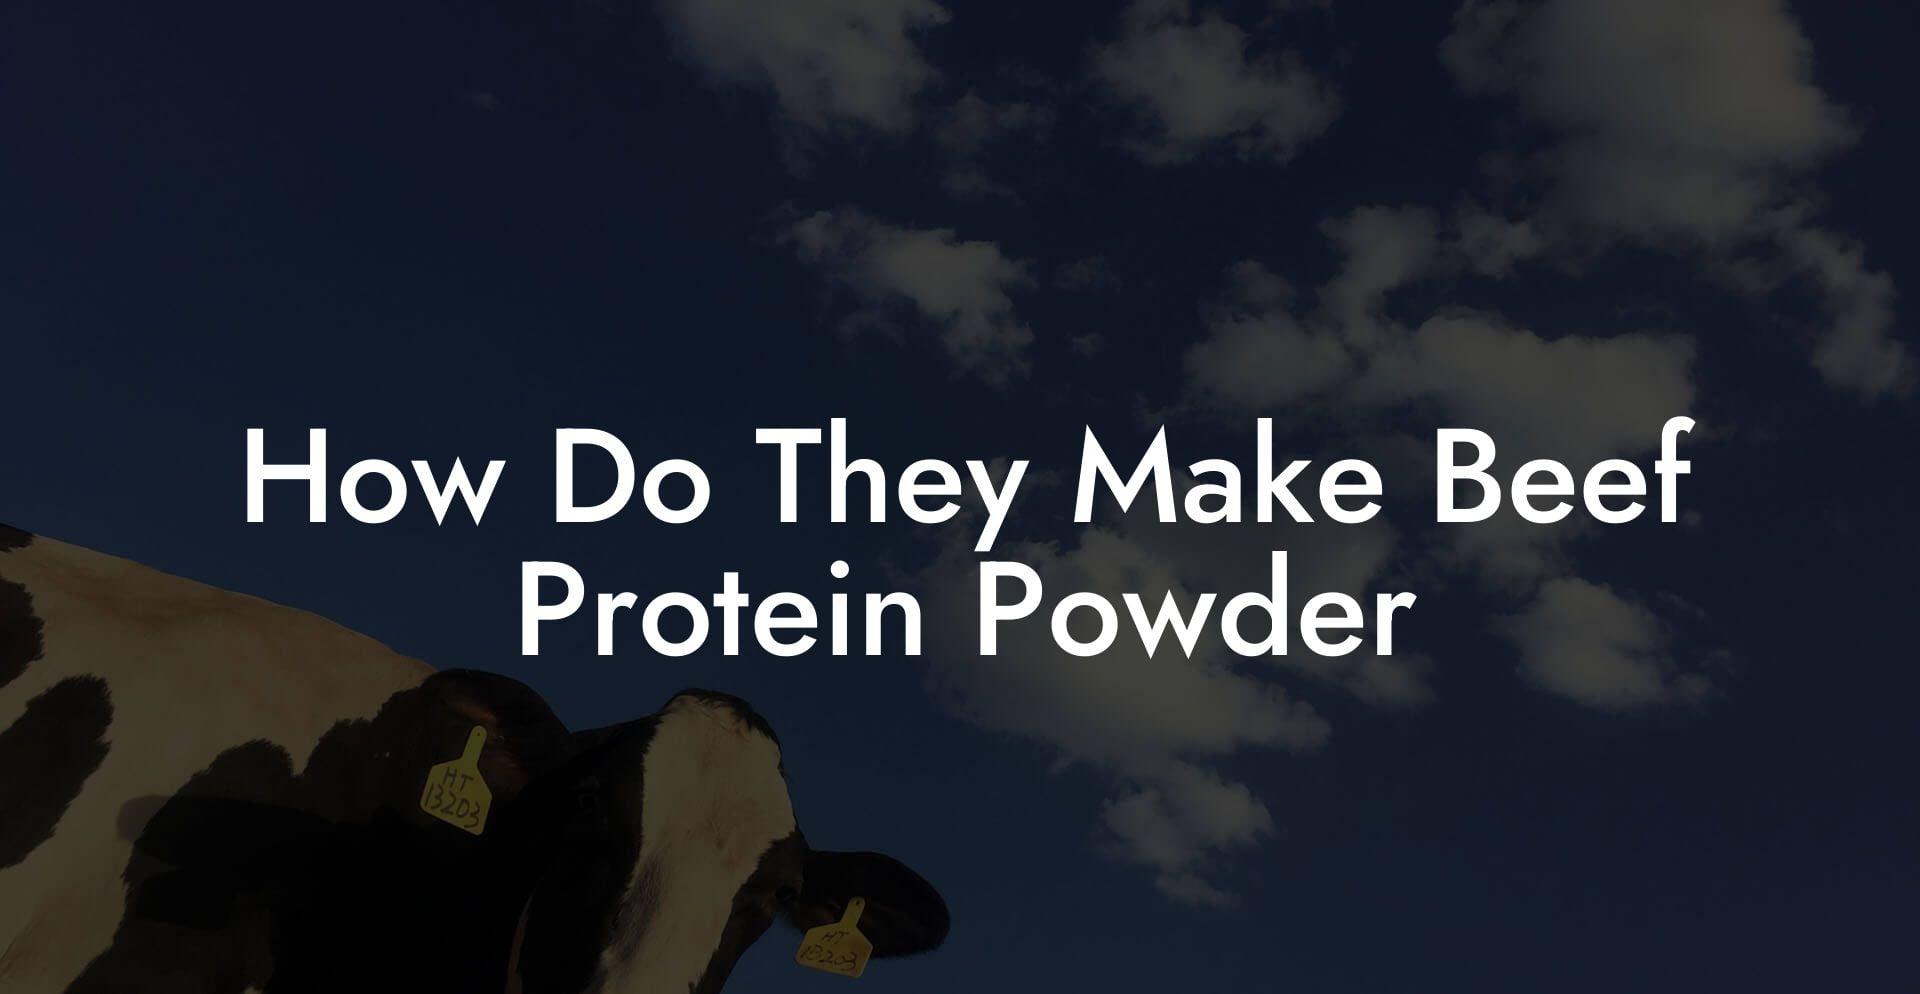 How Do They Make Beef Protein Powder